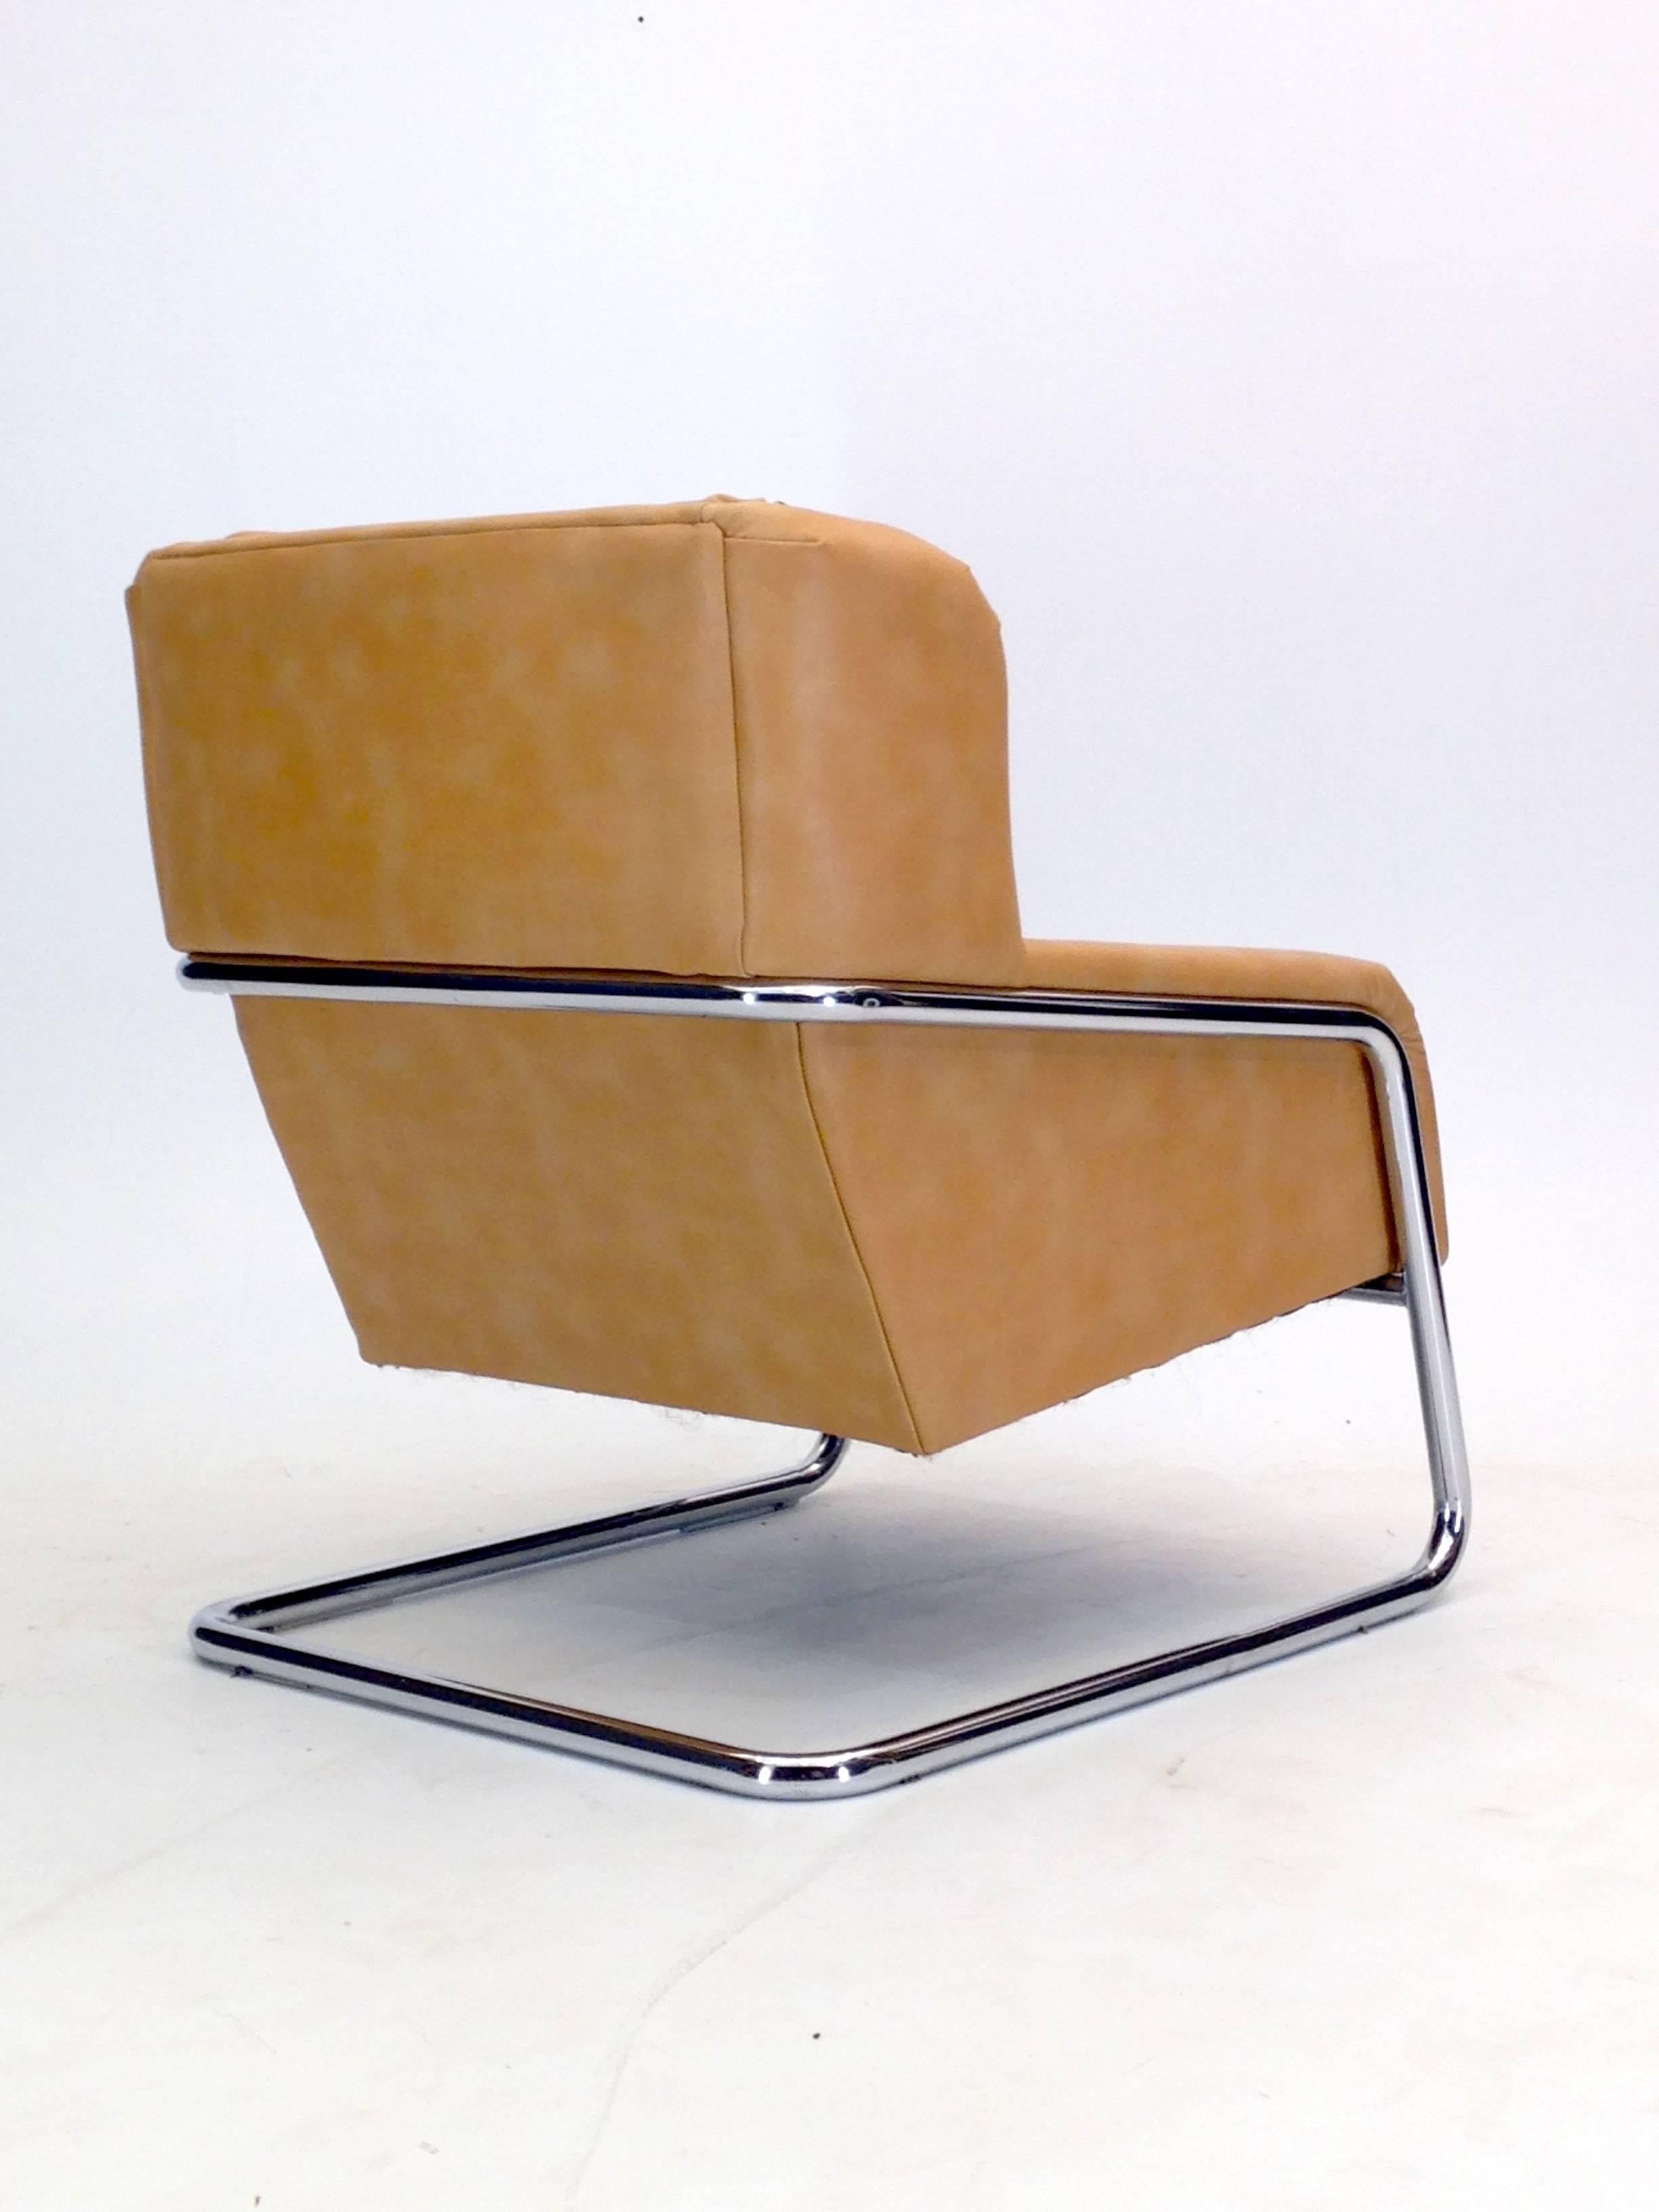 With distinctive architectural lines and a modernist profile, this large armchair is designed for comfort and follows the low profile of modern architectural lines. It is a heavy construction with a tubular steel frame that is one entire piece and